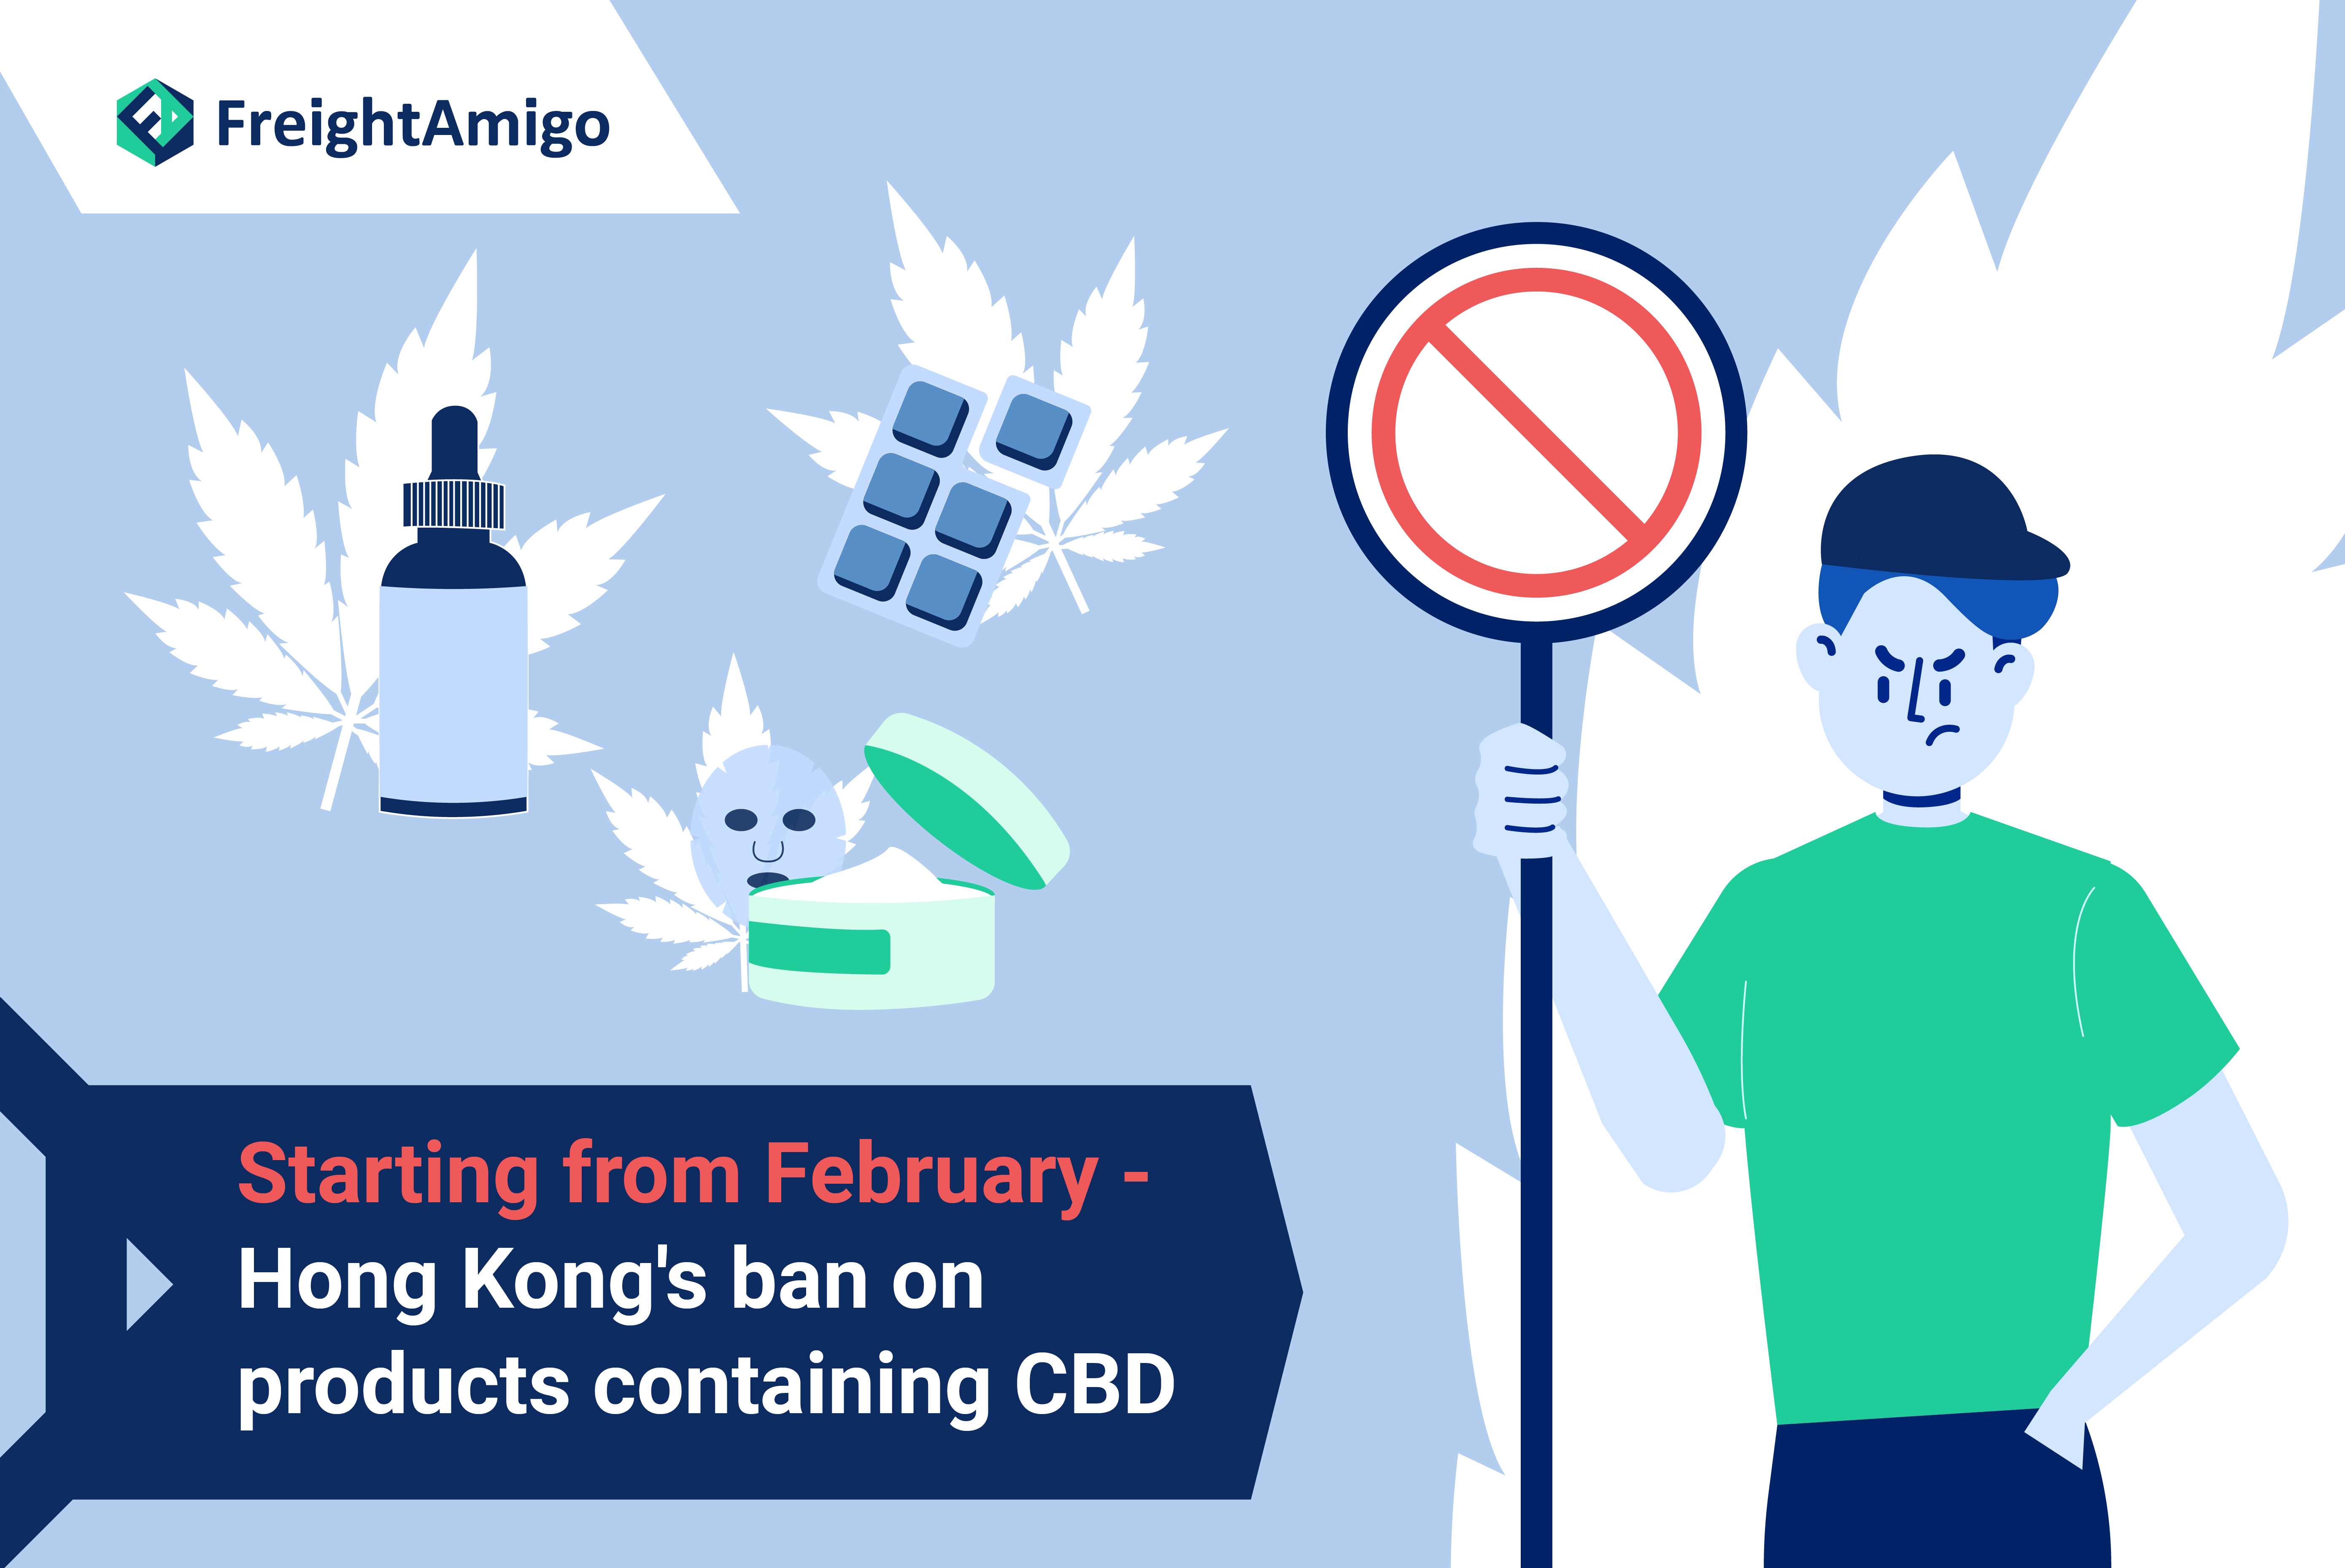 【Shipping Restriction】Hong Kong’s ban on products containing CBD comes into effect in Feb